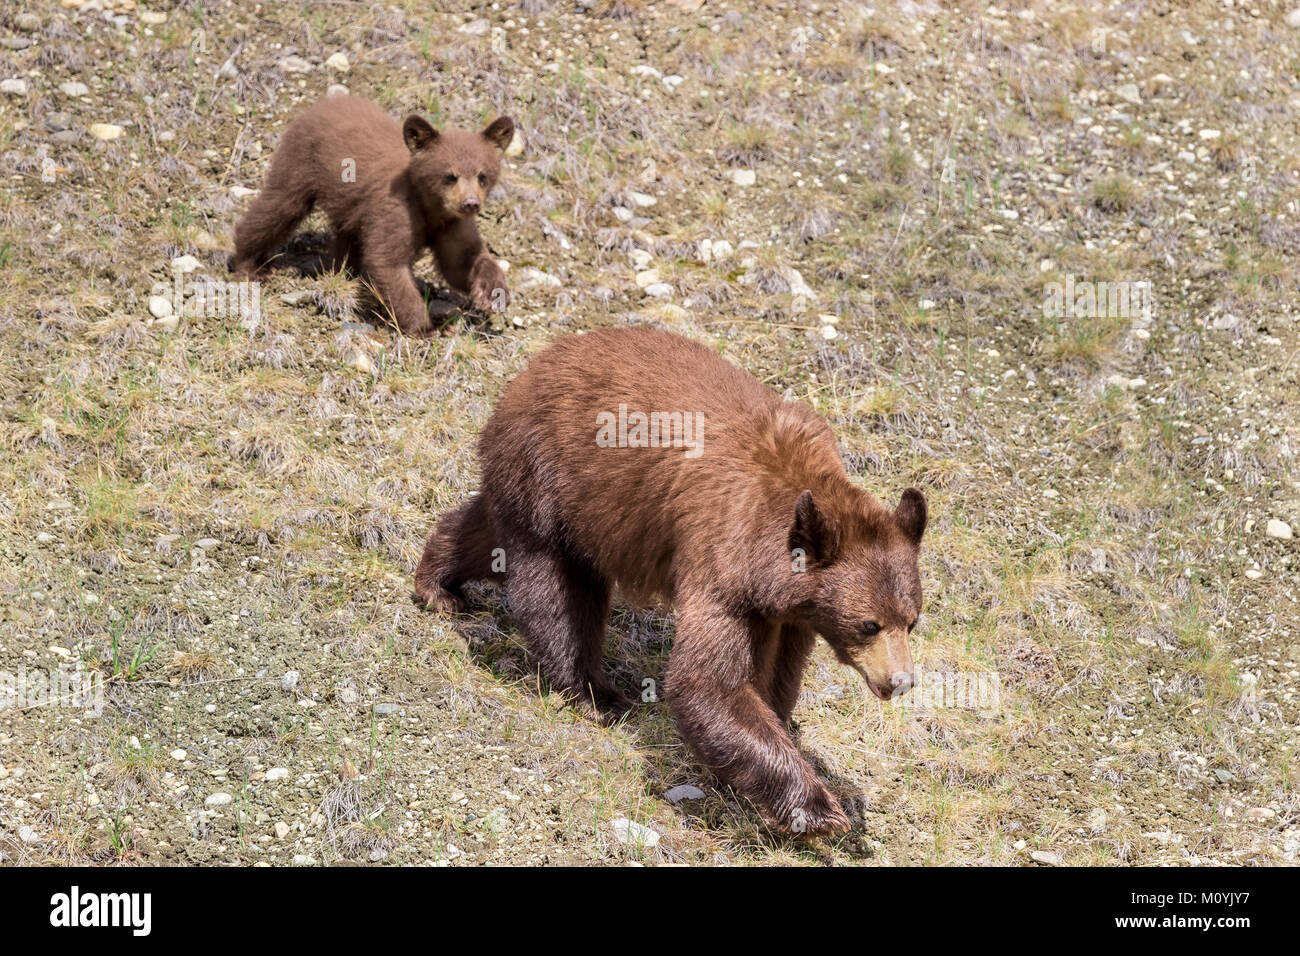 Bear and cub walking on grass Stock Photo